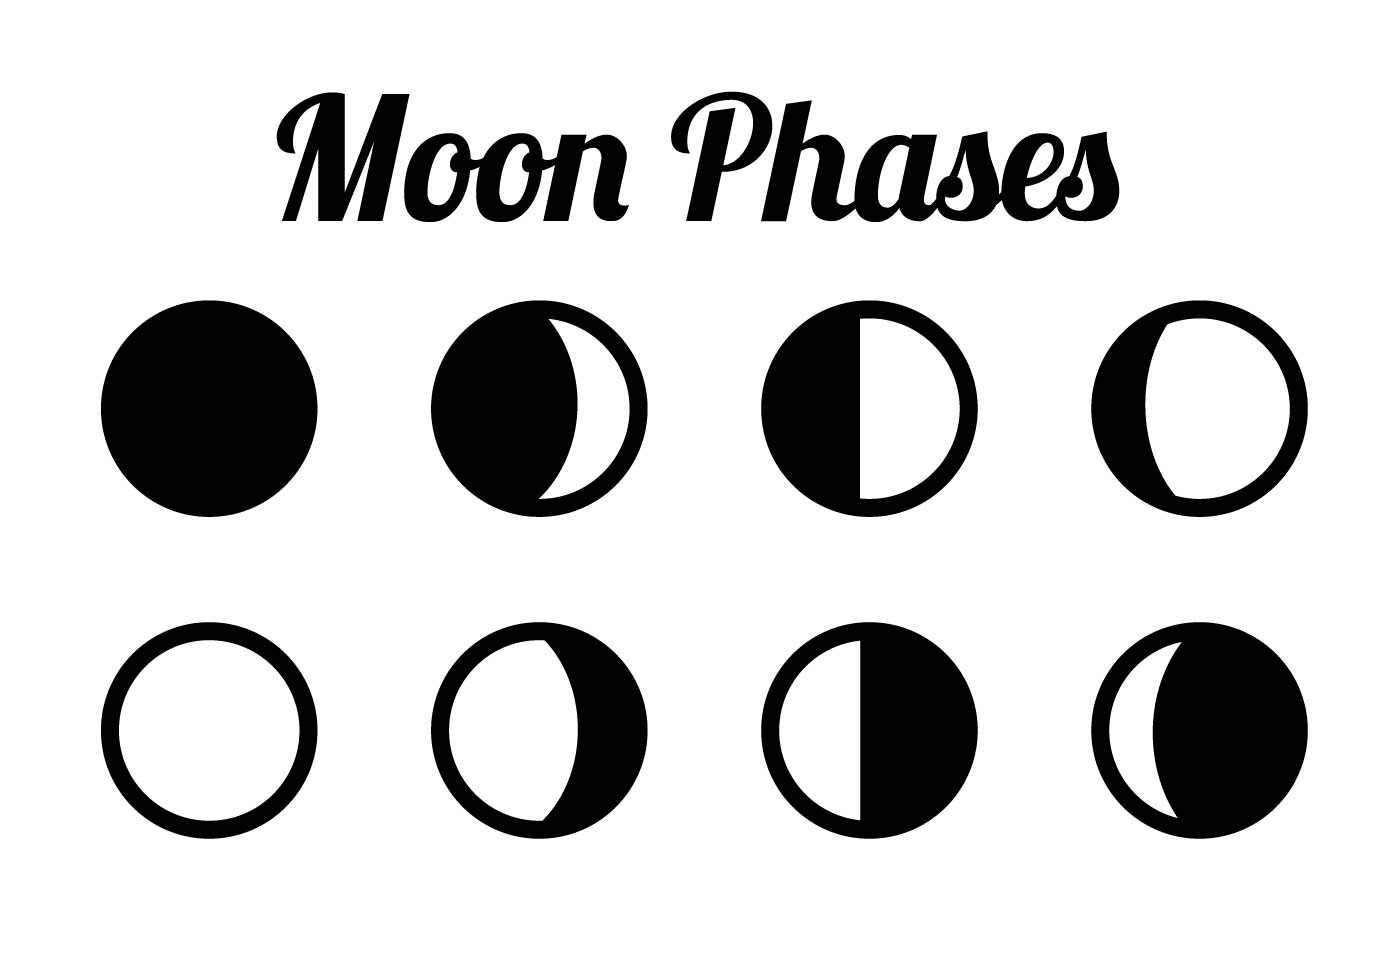 Free Moon Phases Vector Download Free Vector Art, Stock